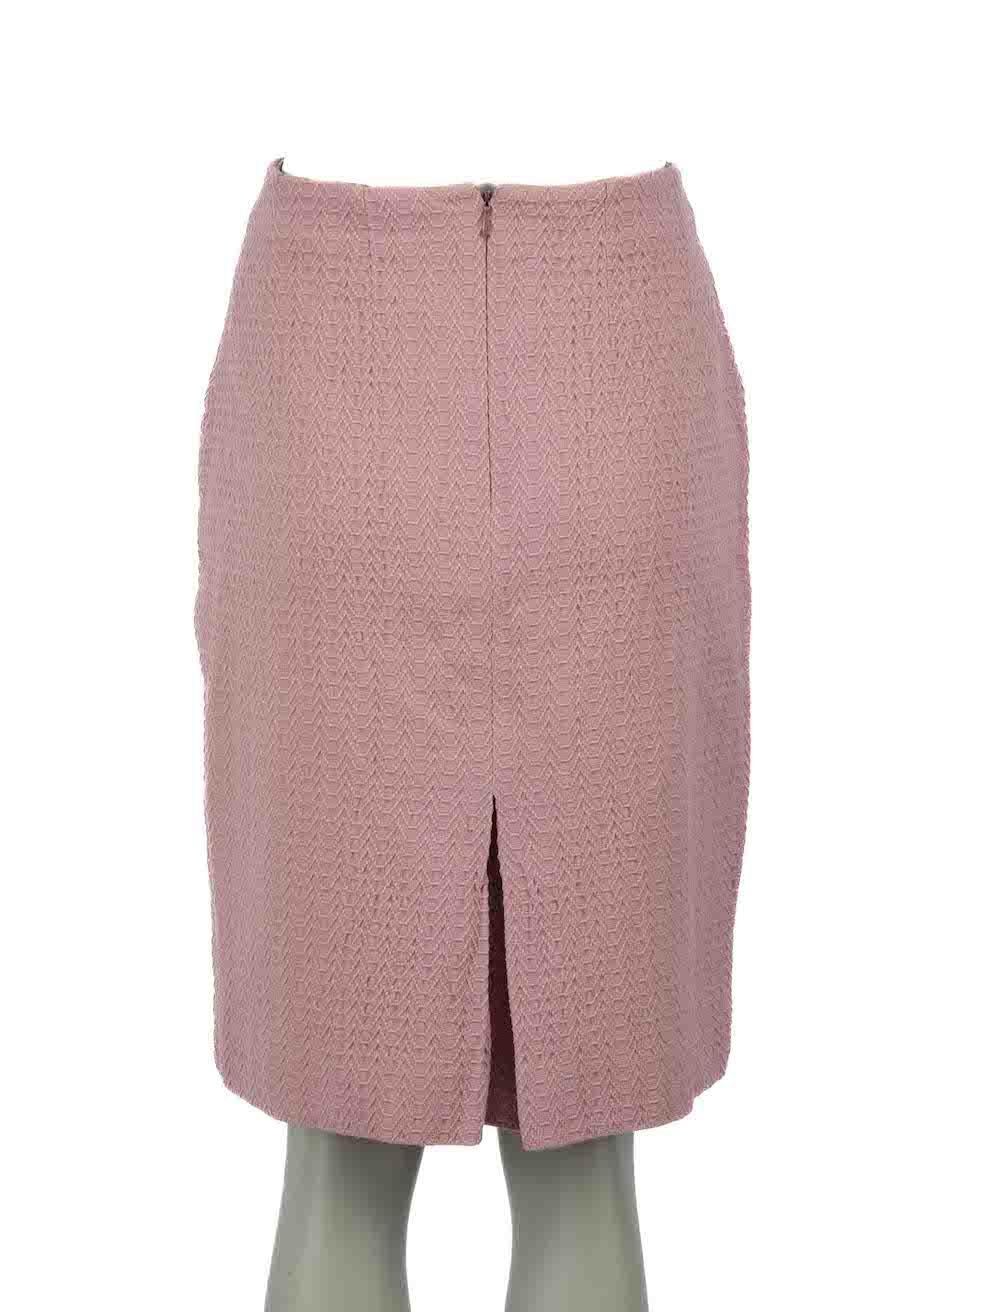 Dior Pink Wool Patterned Pencil Skirt Size XXL In Excellent Condition For Sale In London, GB